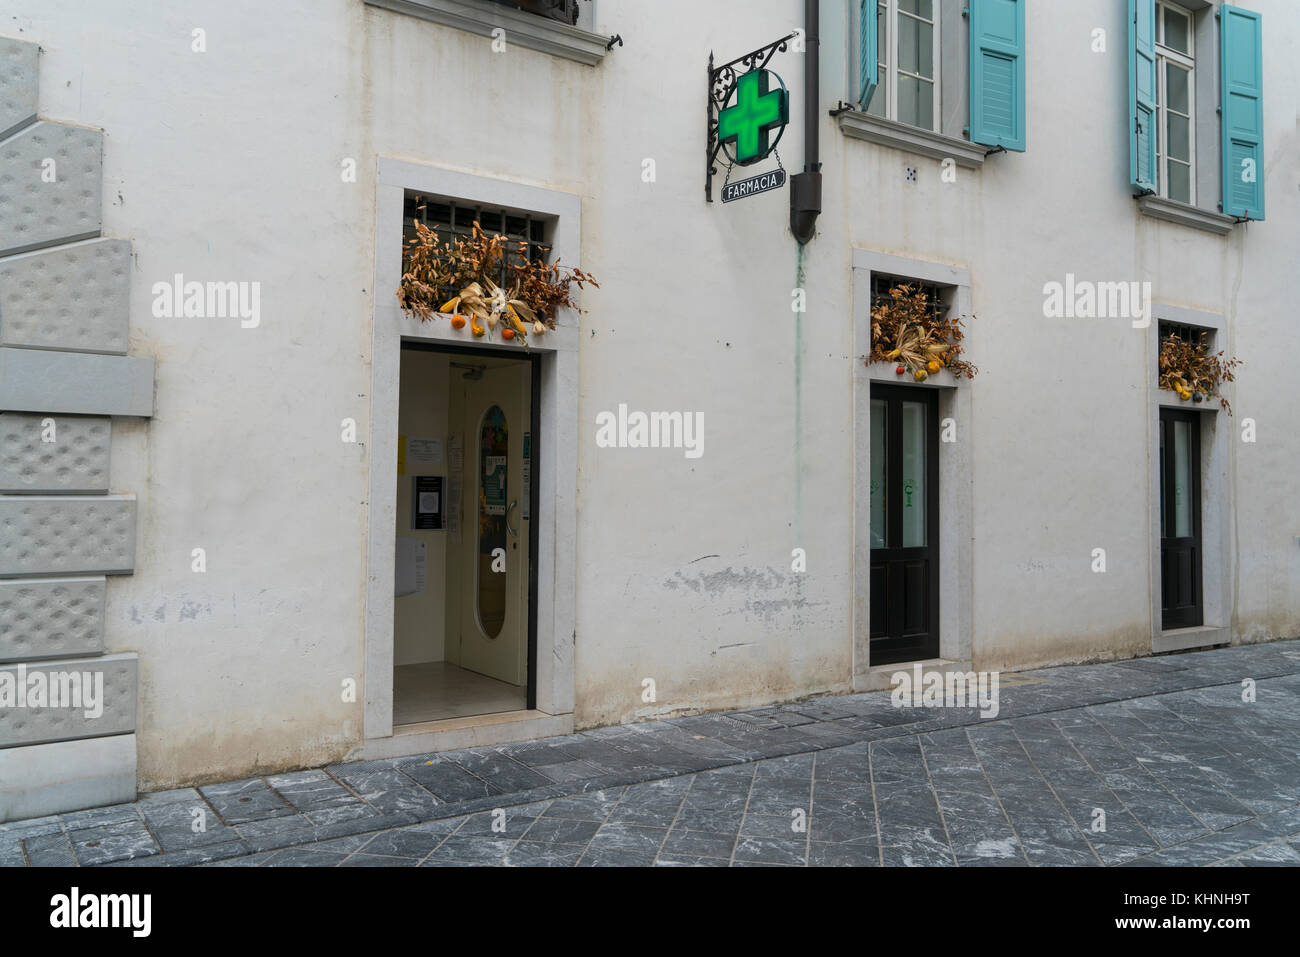 floral decorations on the houses in the center of Venzone, Friuli, Italy Stock Photo